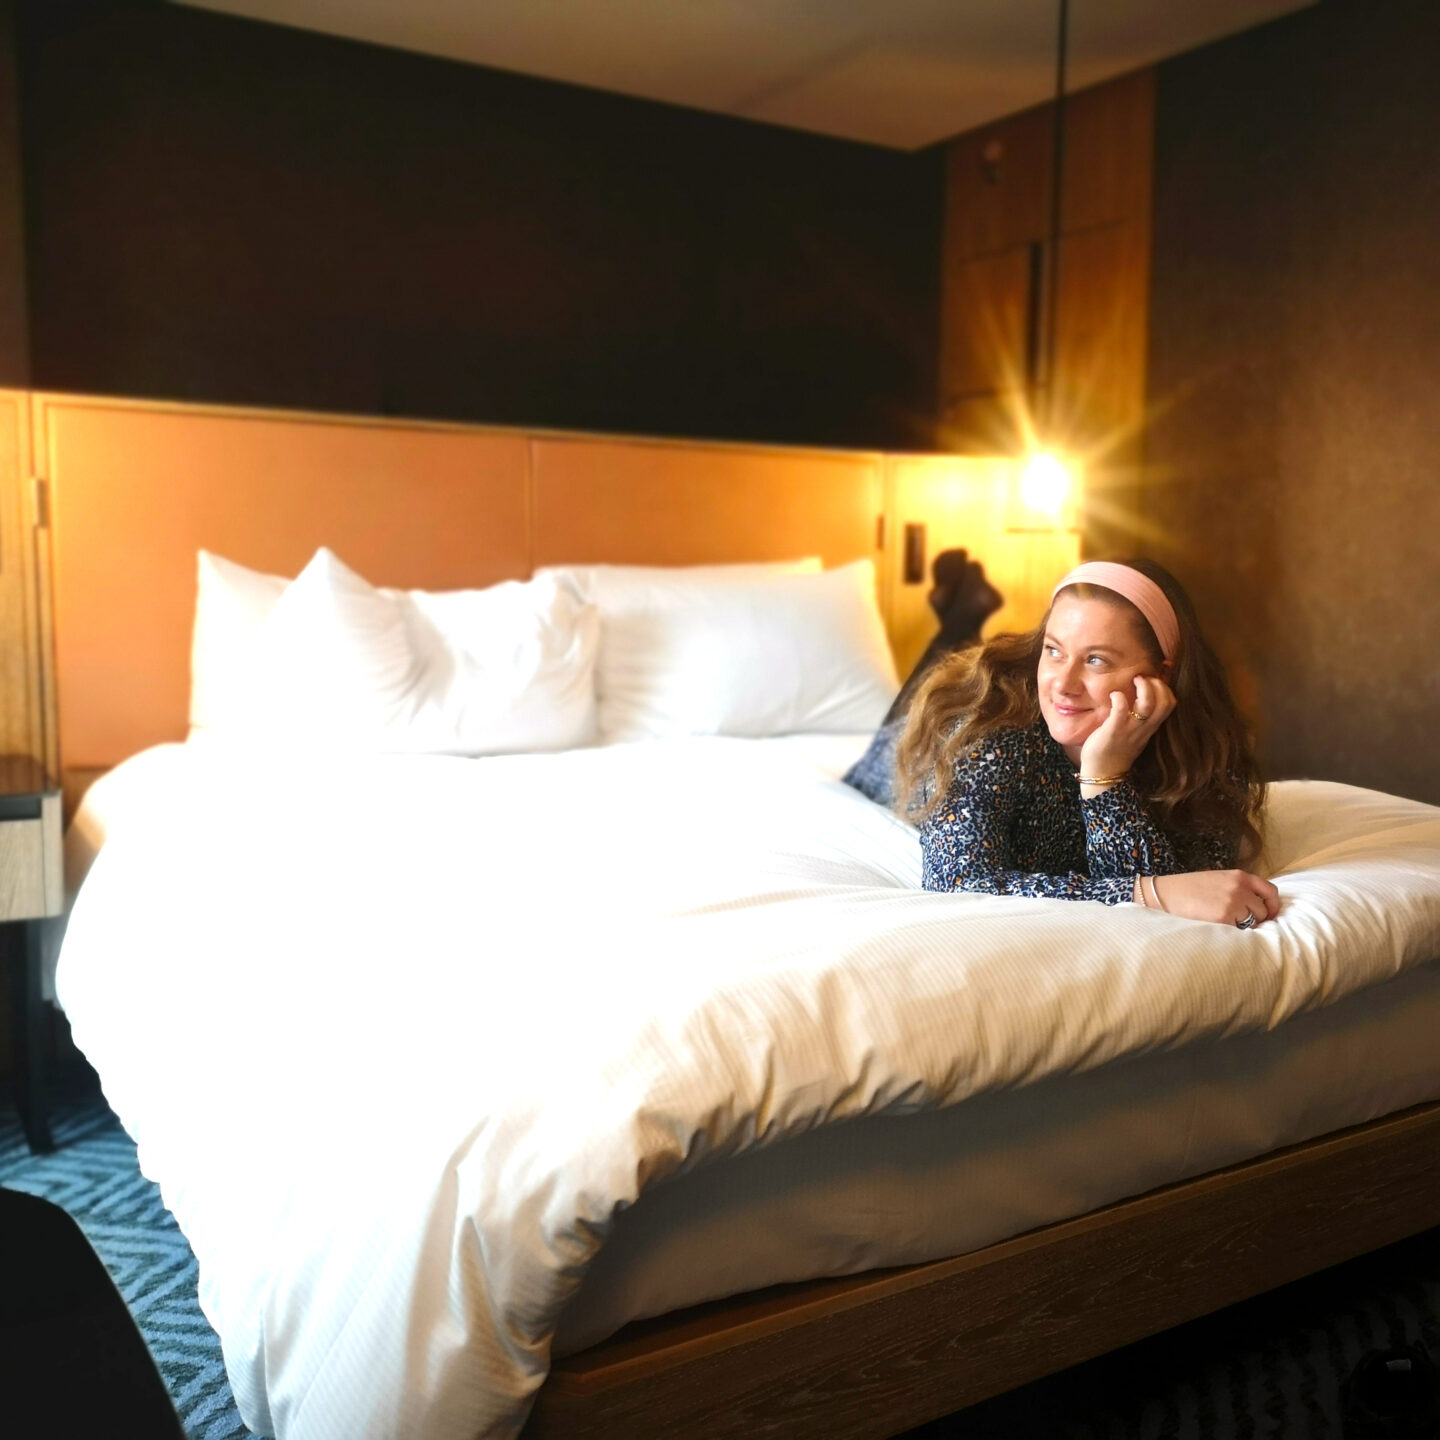 Hilton London Bankside, South Bank, Hotel Review, Family Staycation, London Hotel, Hitlon, Family-Friendly, UK Staycation, London Break, Family Break, The Frenchie Mummy, Family Stay 